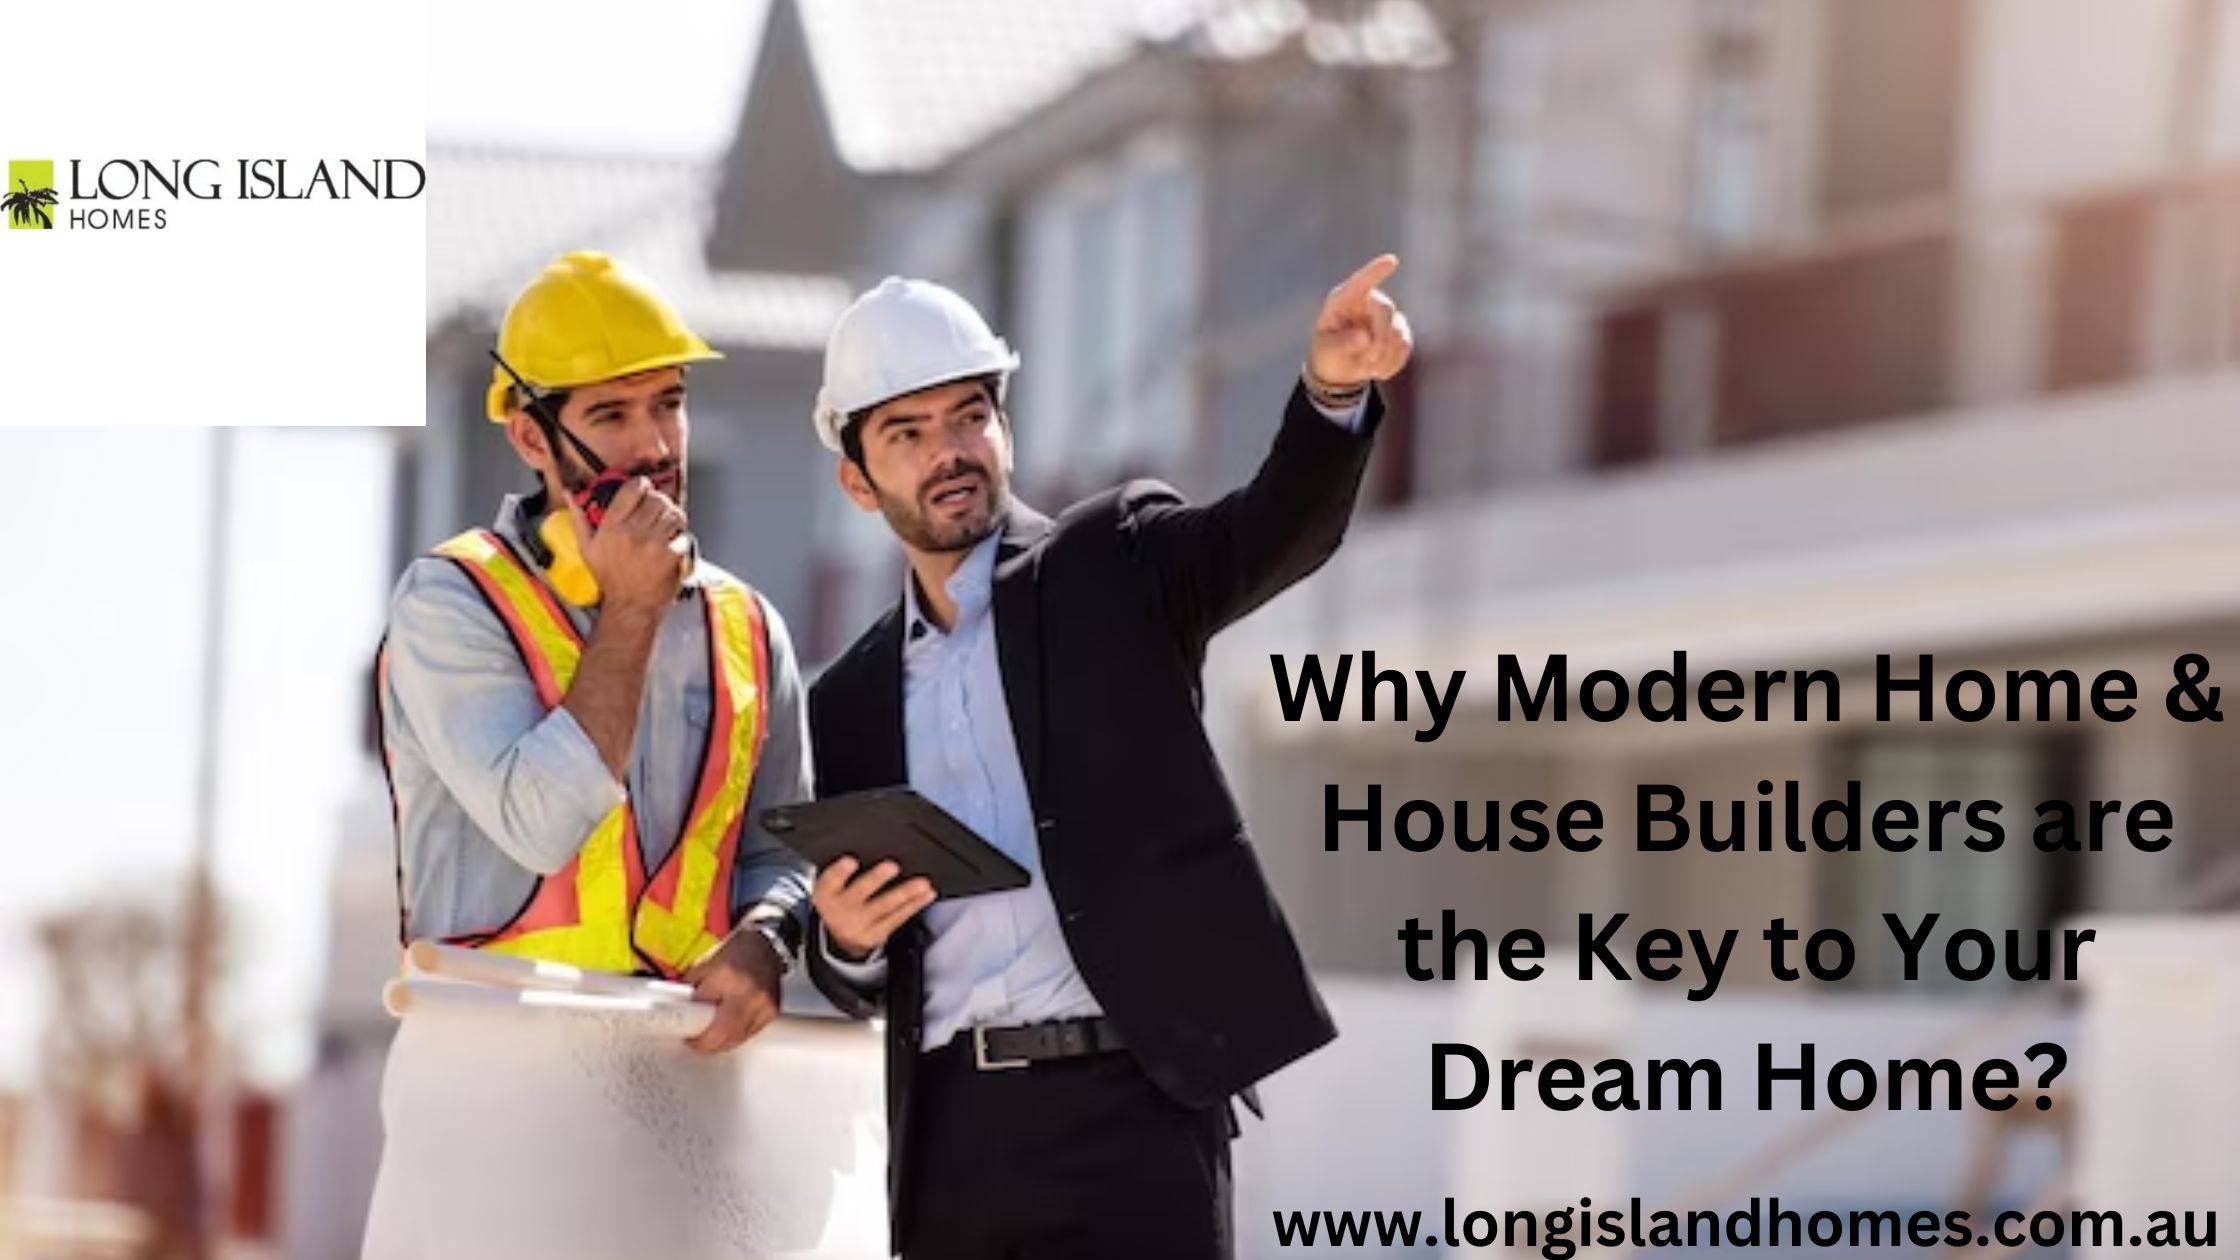 Why Modern Home & House Builders are the Key to Your Dream Home?